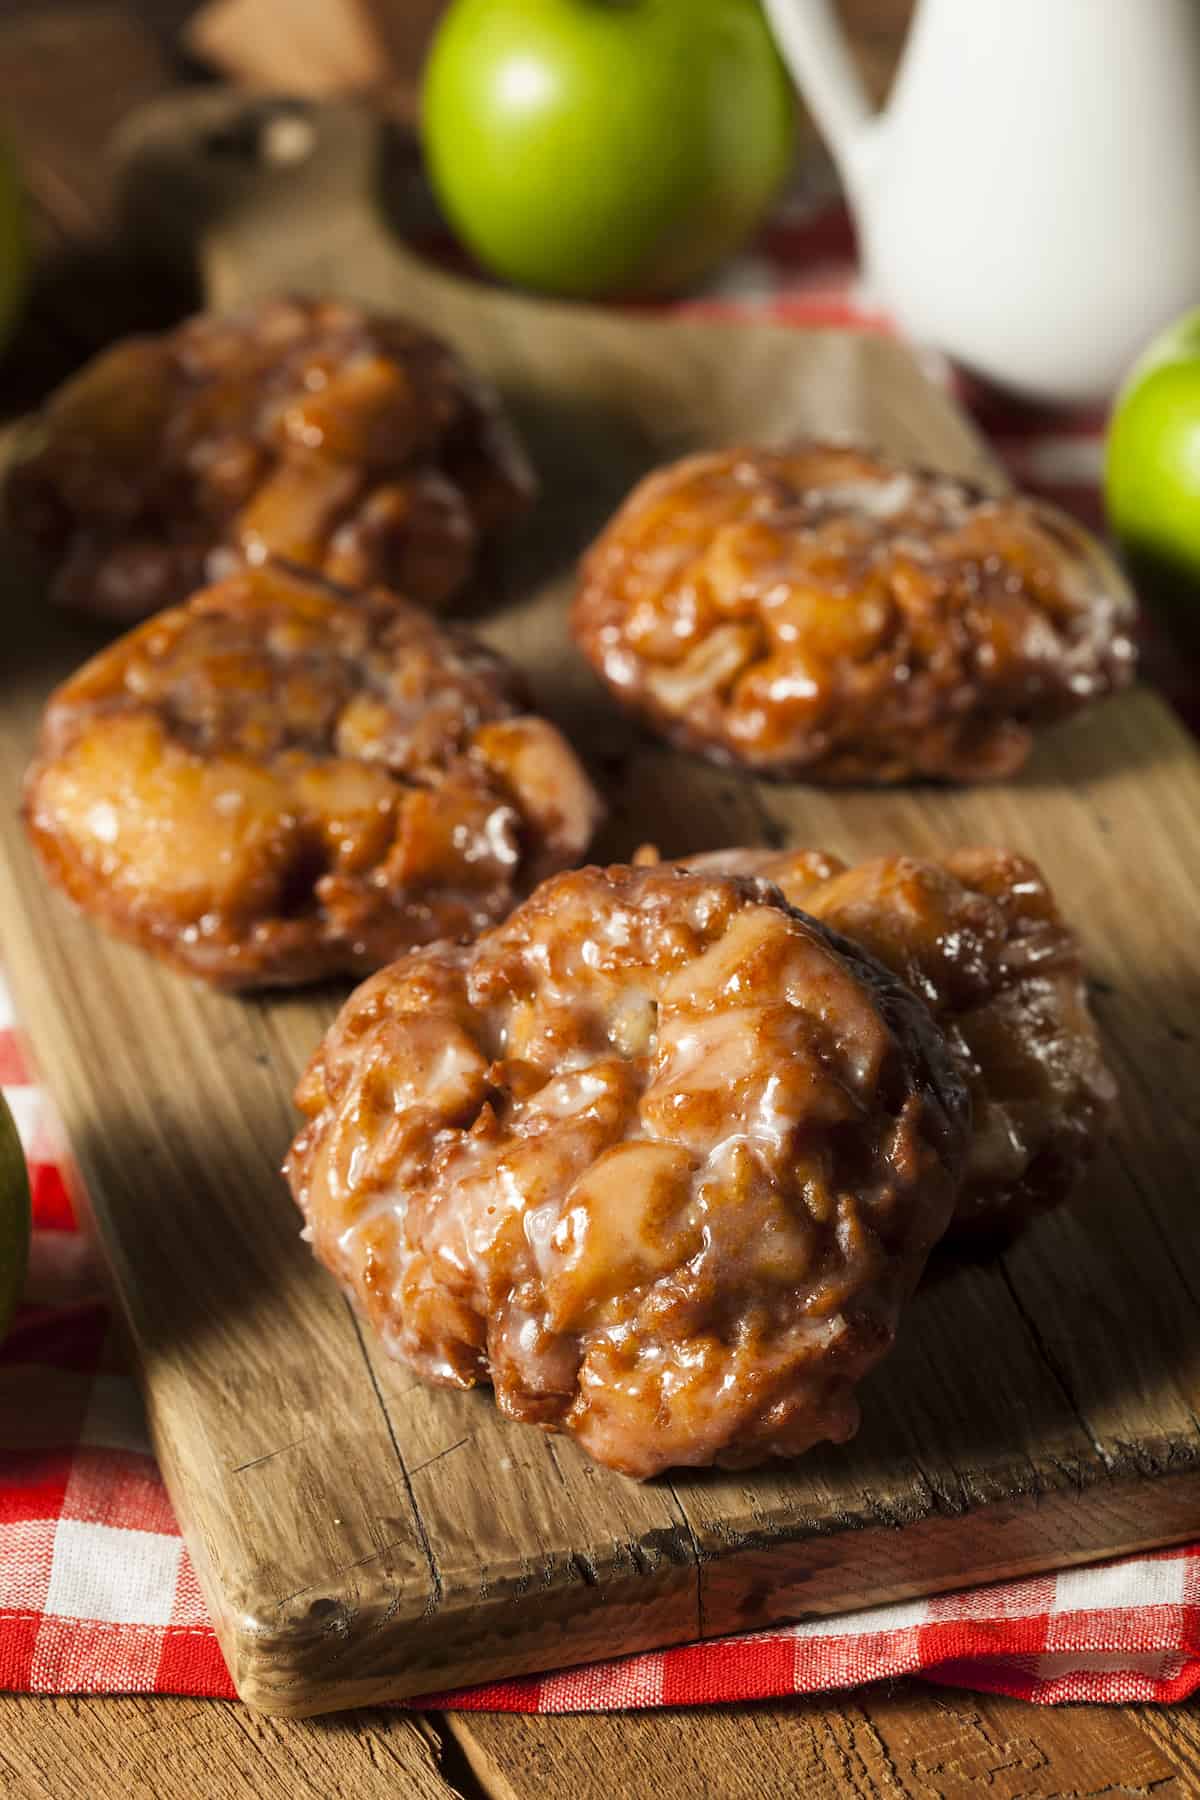 3 apple fritters on a wood cutting board